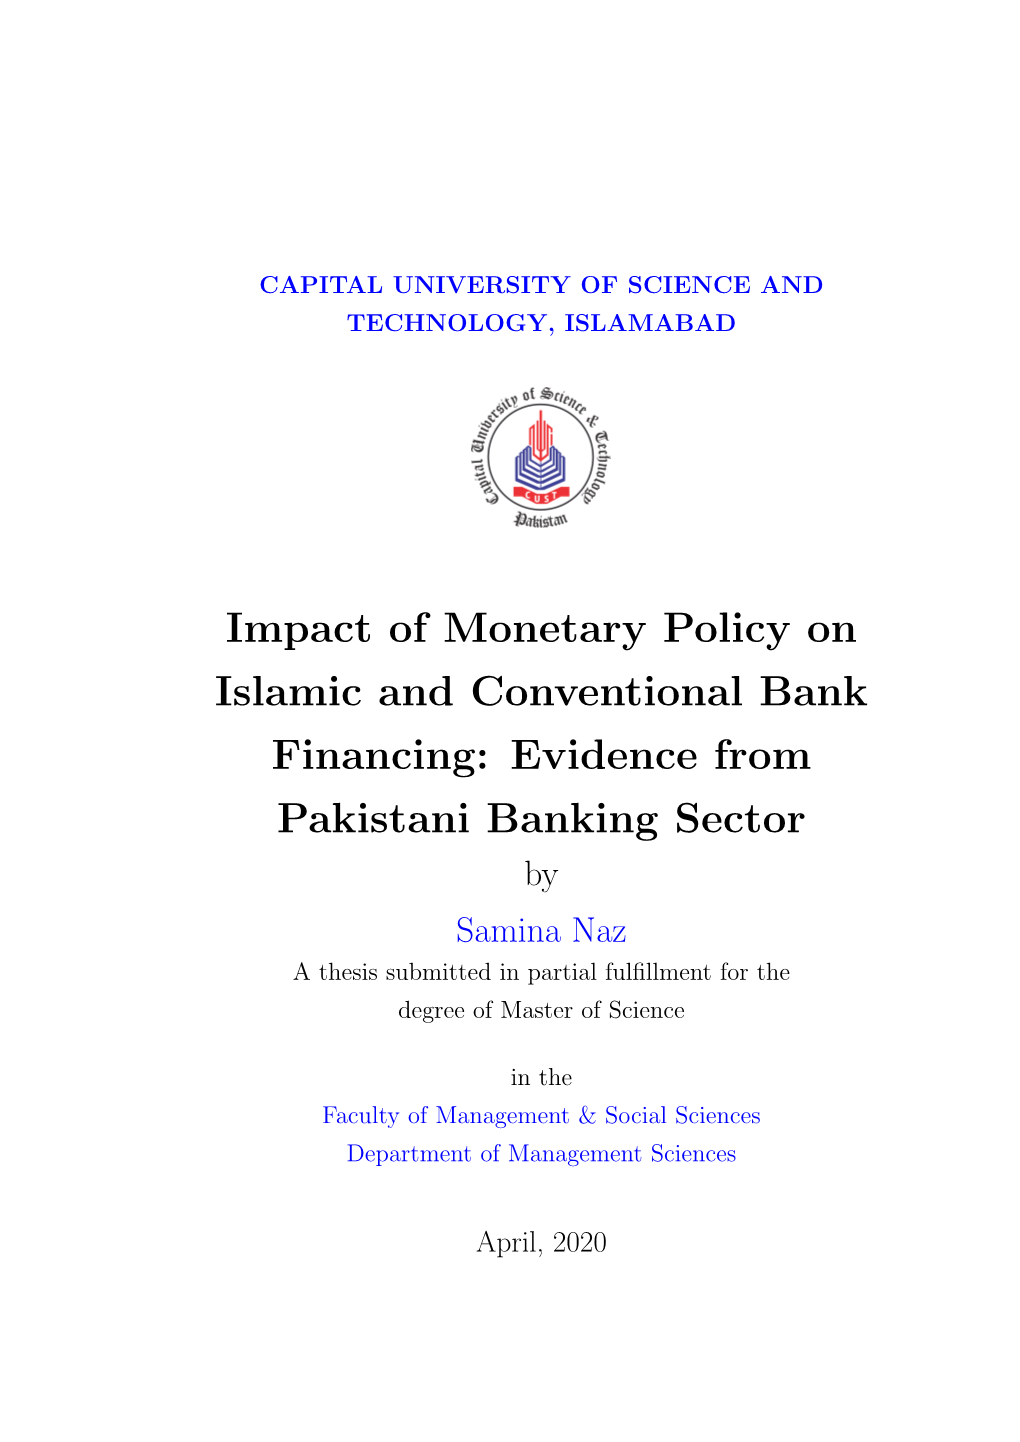 Impact of Monetary Policy on Islamic and Conventional Bank Financing: Evidence from Pakistani Banking Sector